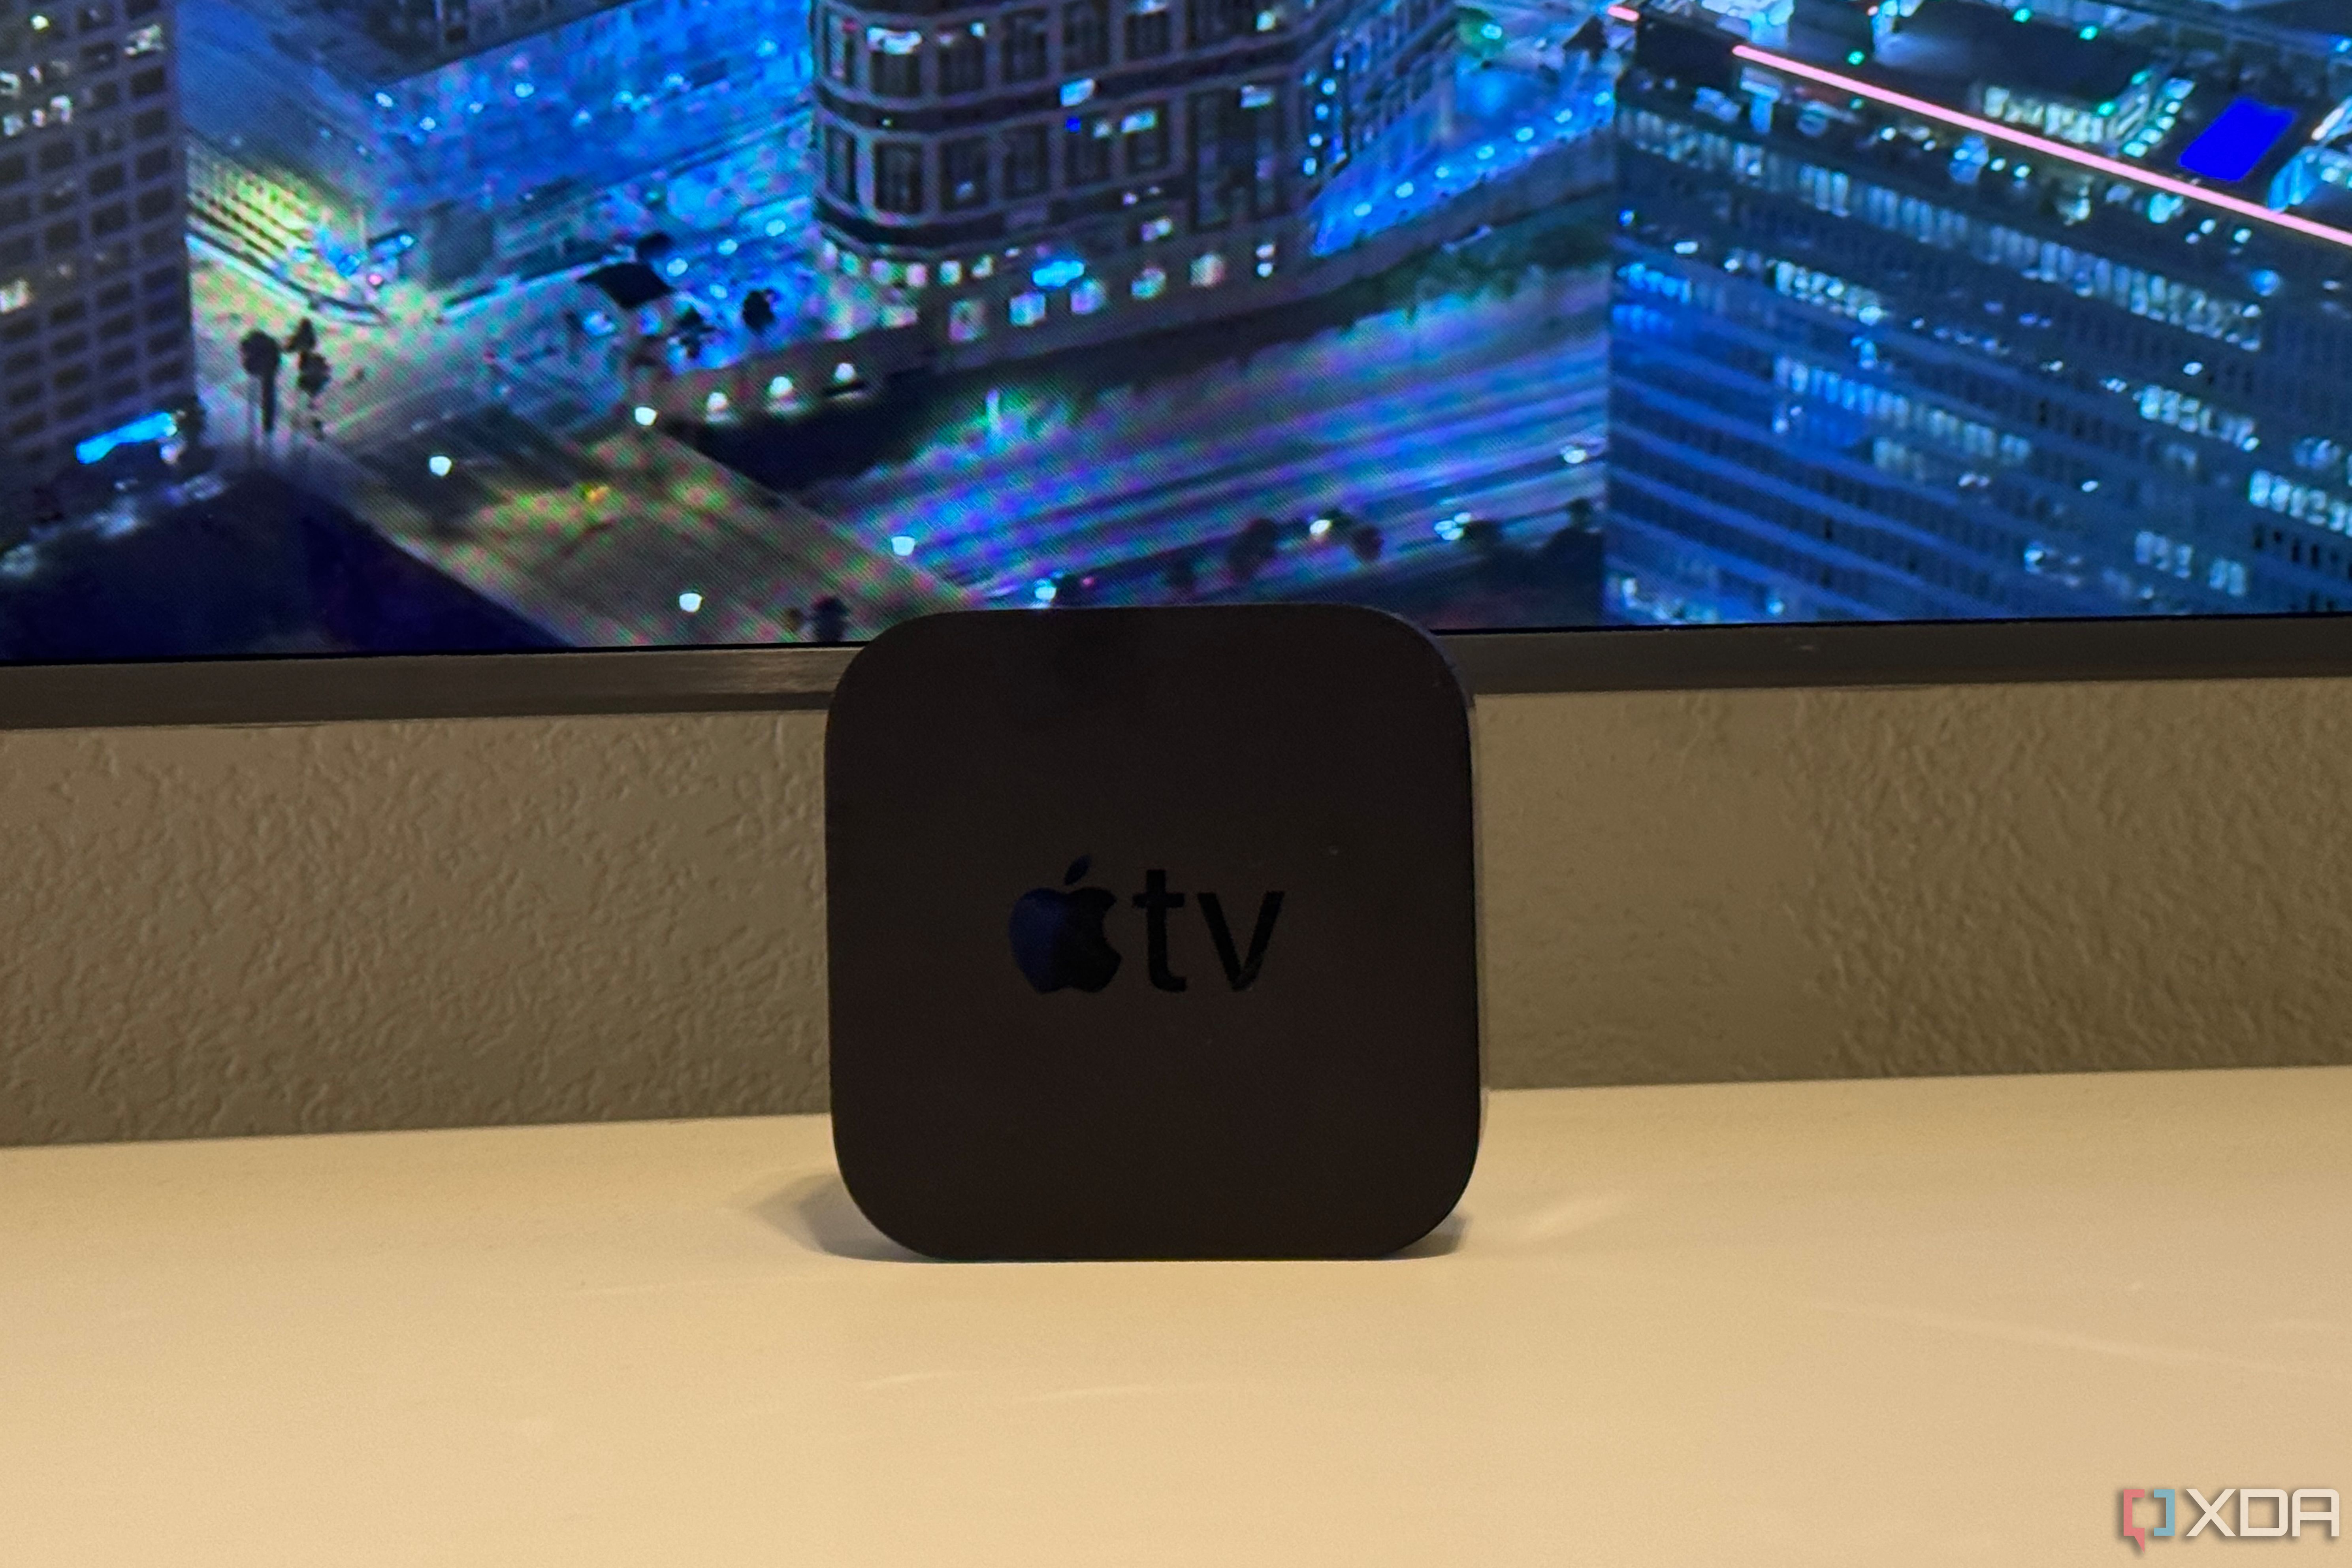 An Apple TV 4K on a desk in front of a TV.